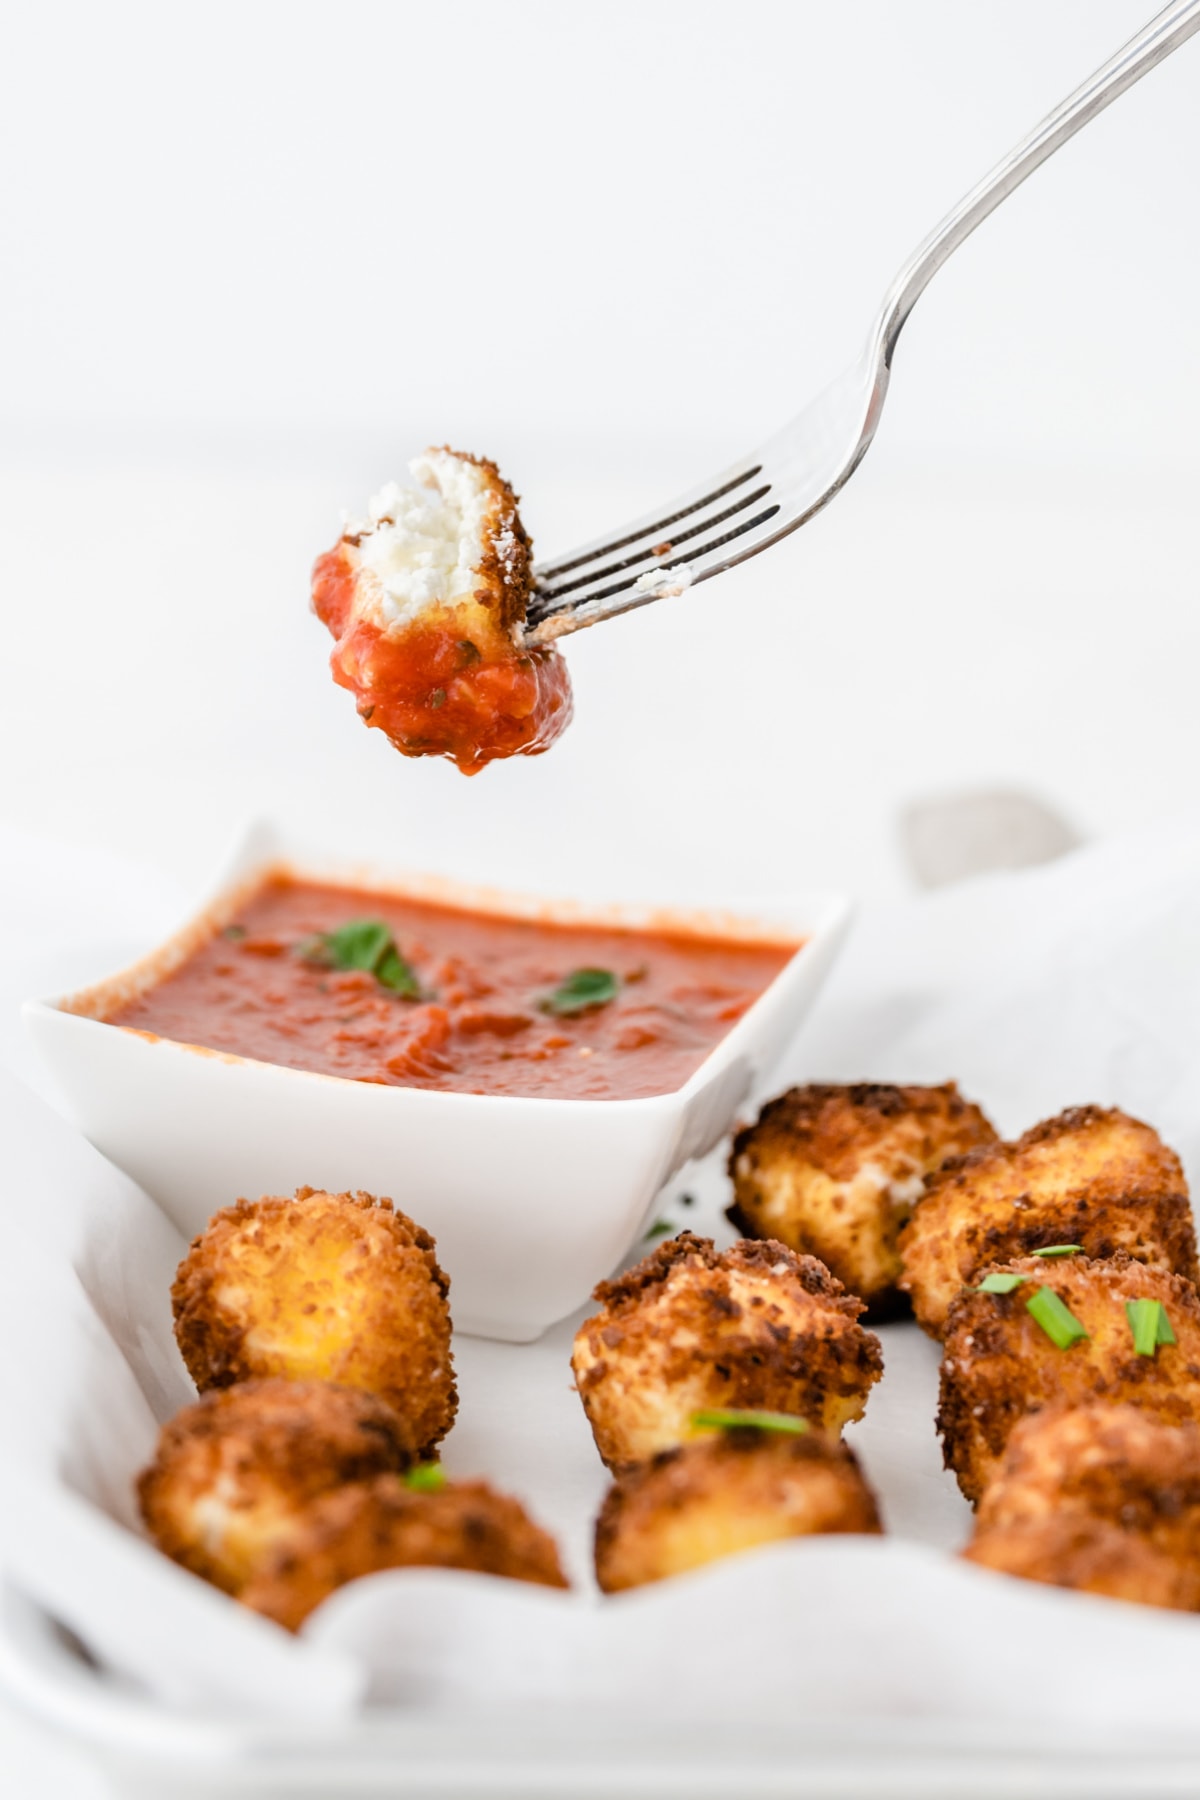 Fried goat cheese on fork dipped in sauce